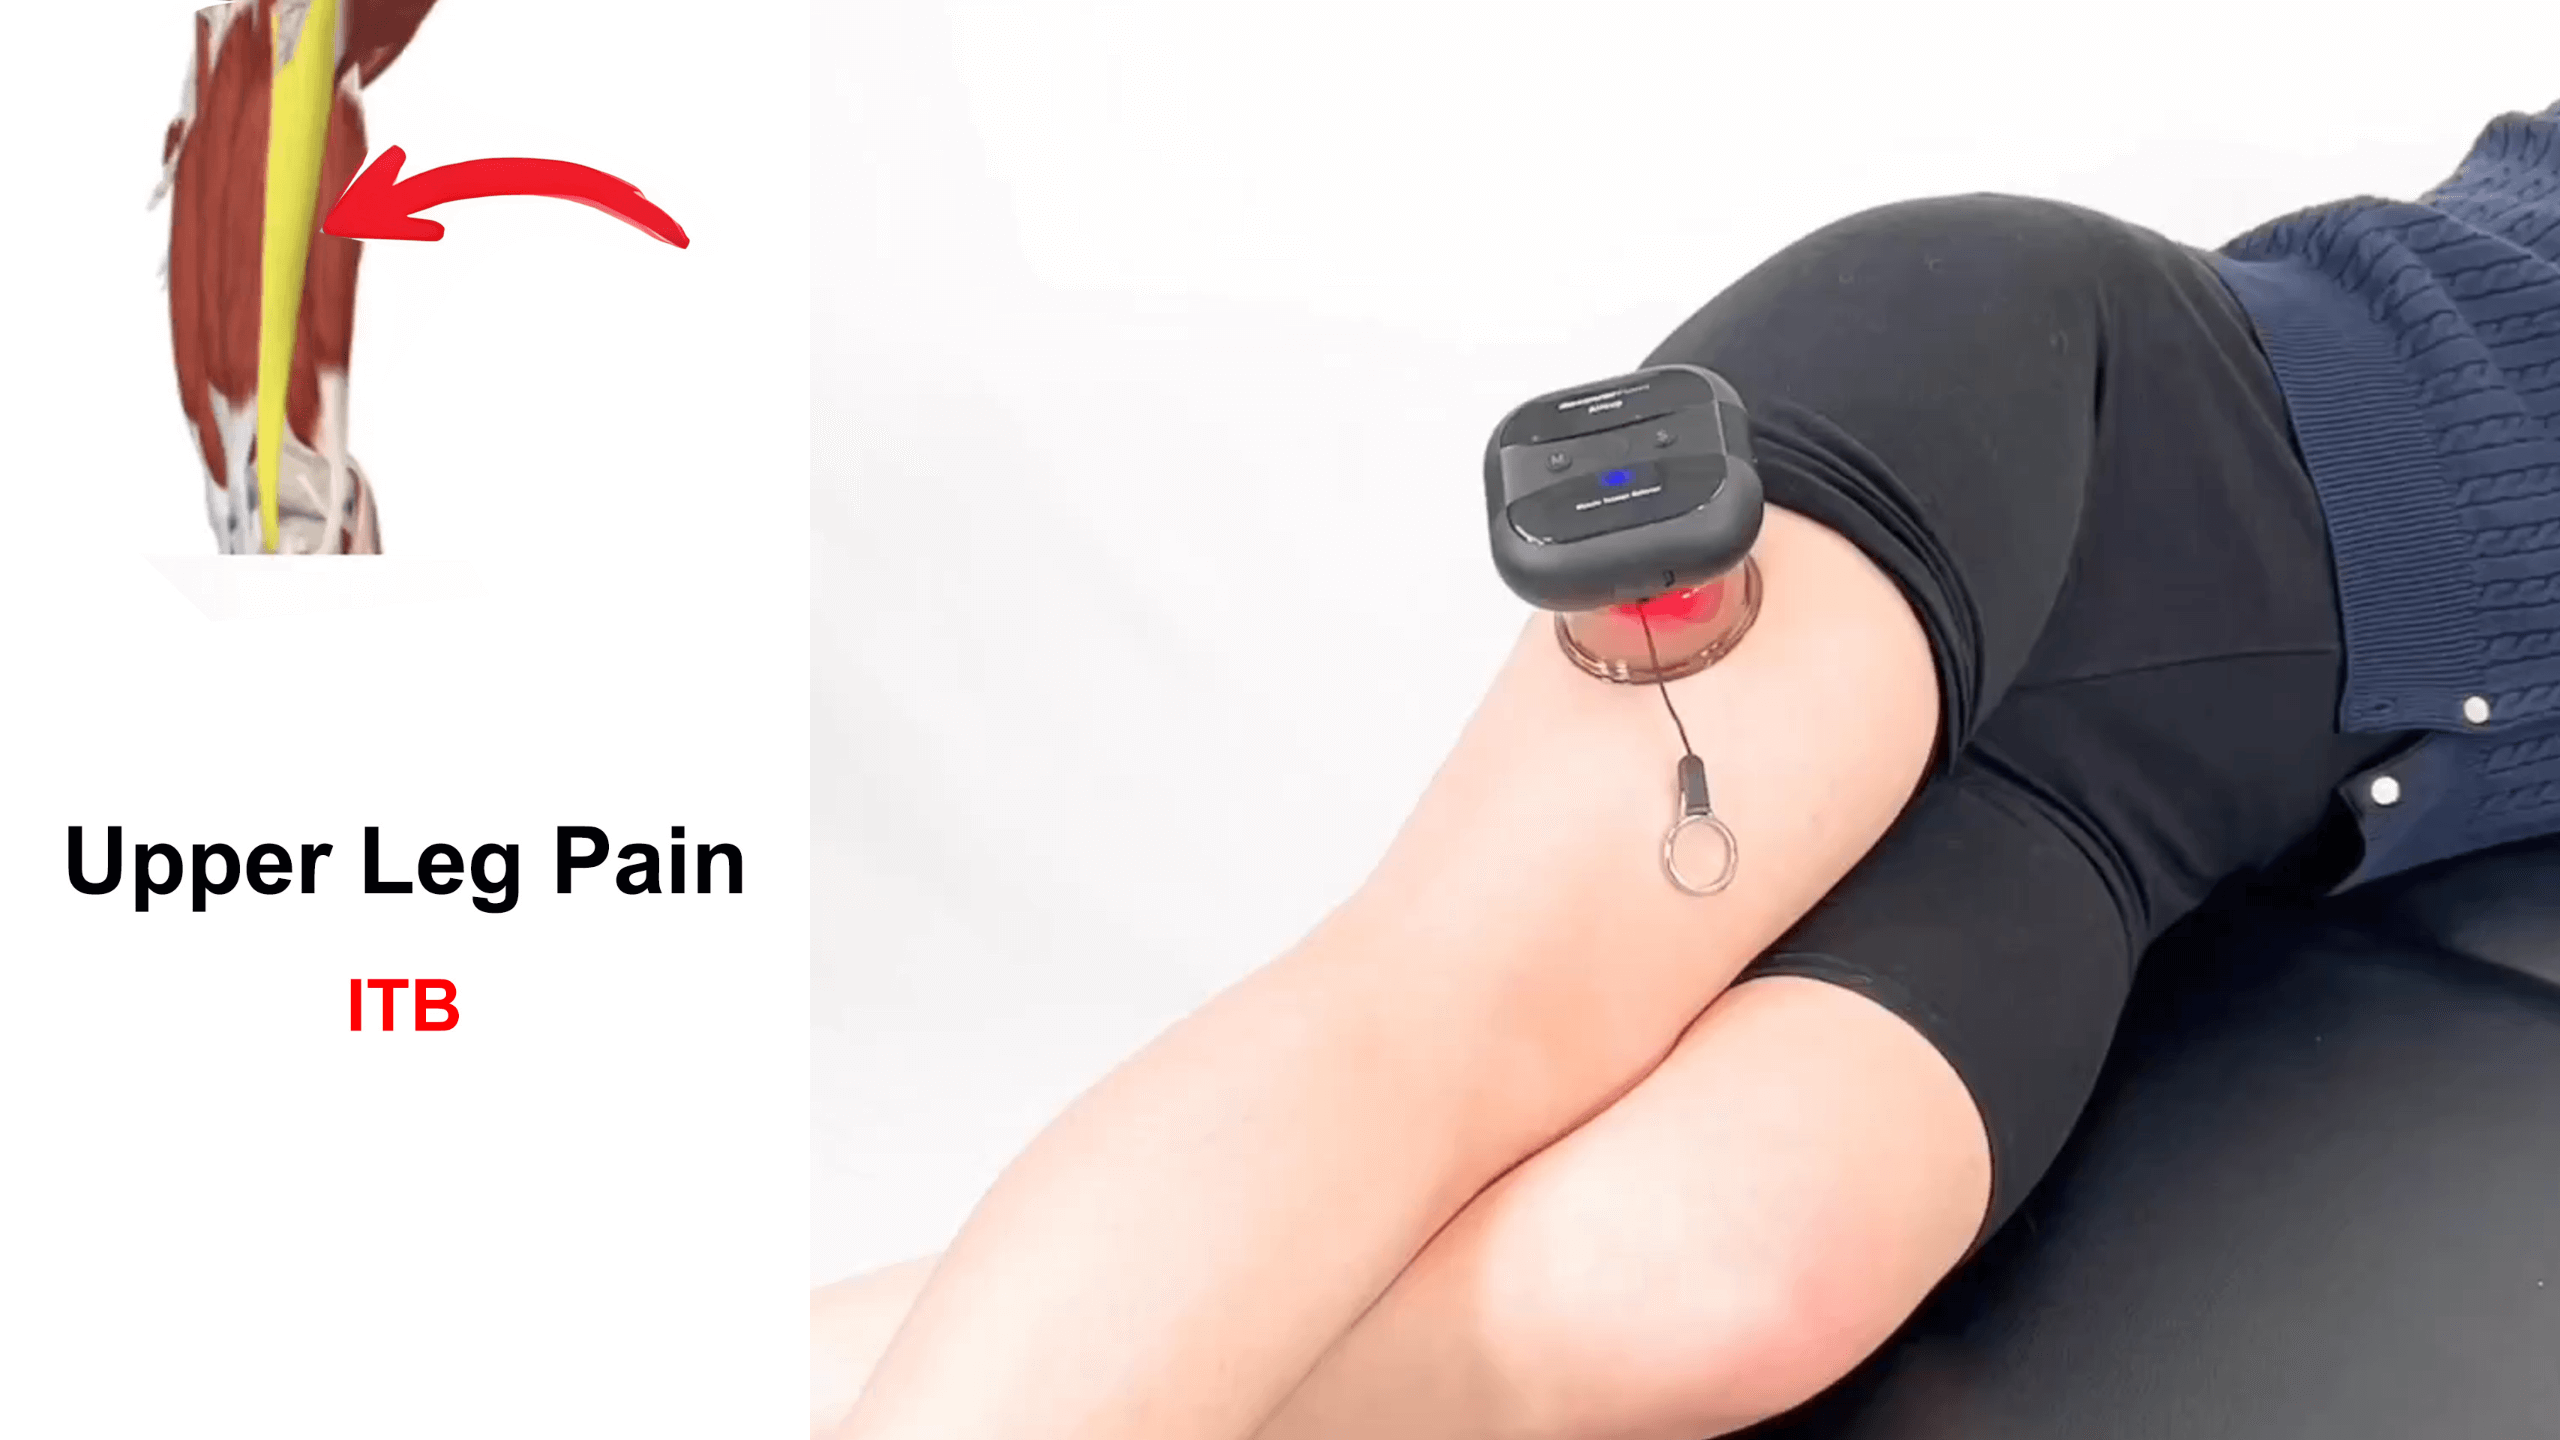 Load video: Upper Leg Pain Release | Cupping Massage for ITB